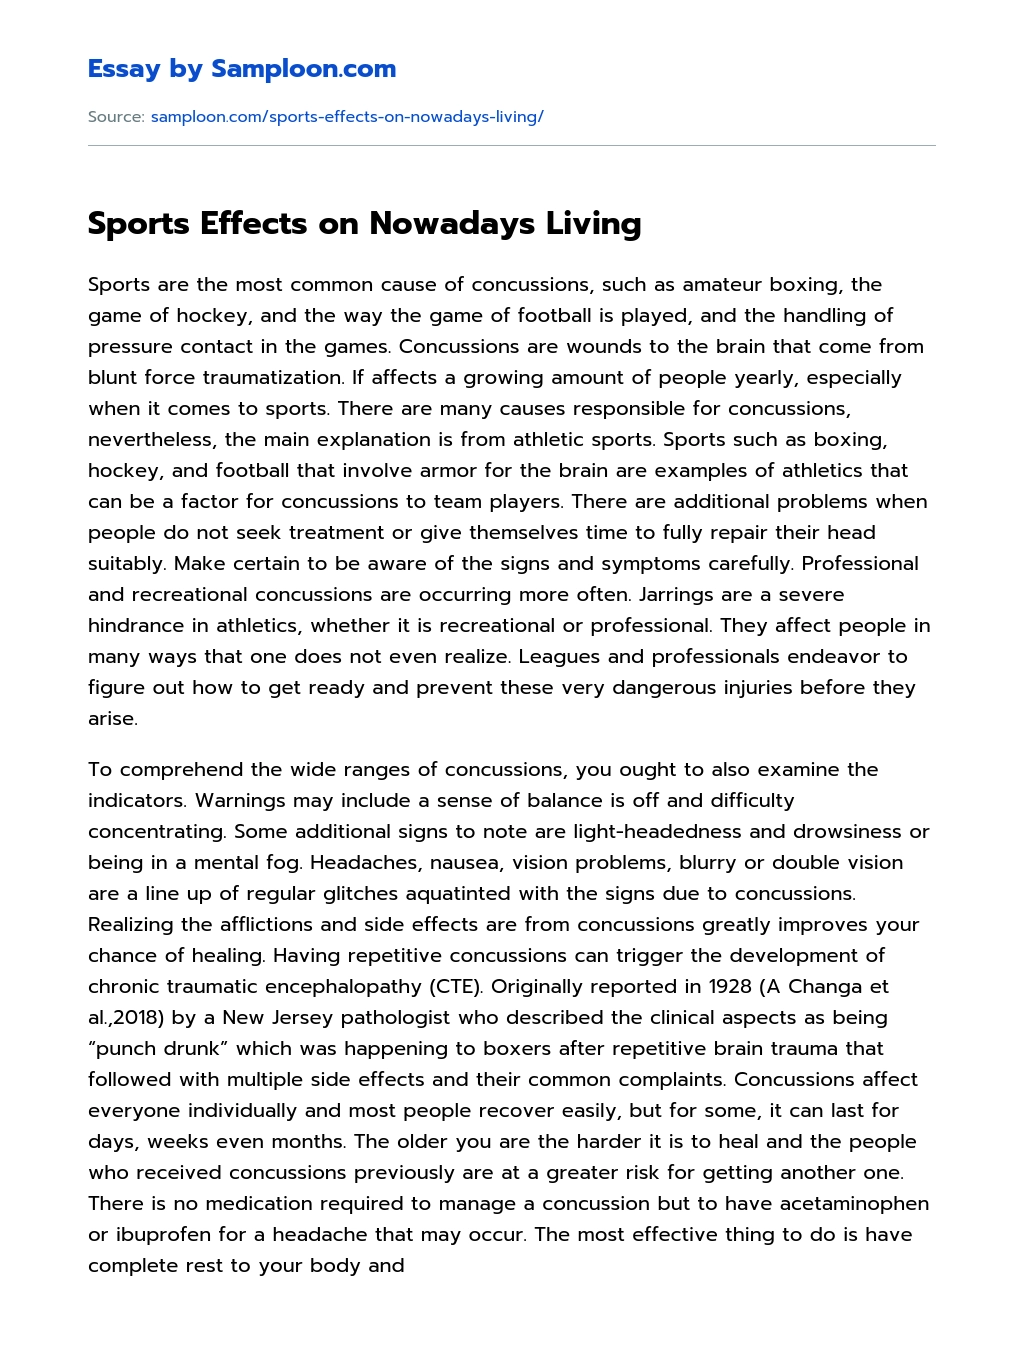 Sports Effects on Nowadays Living essay